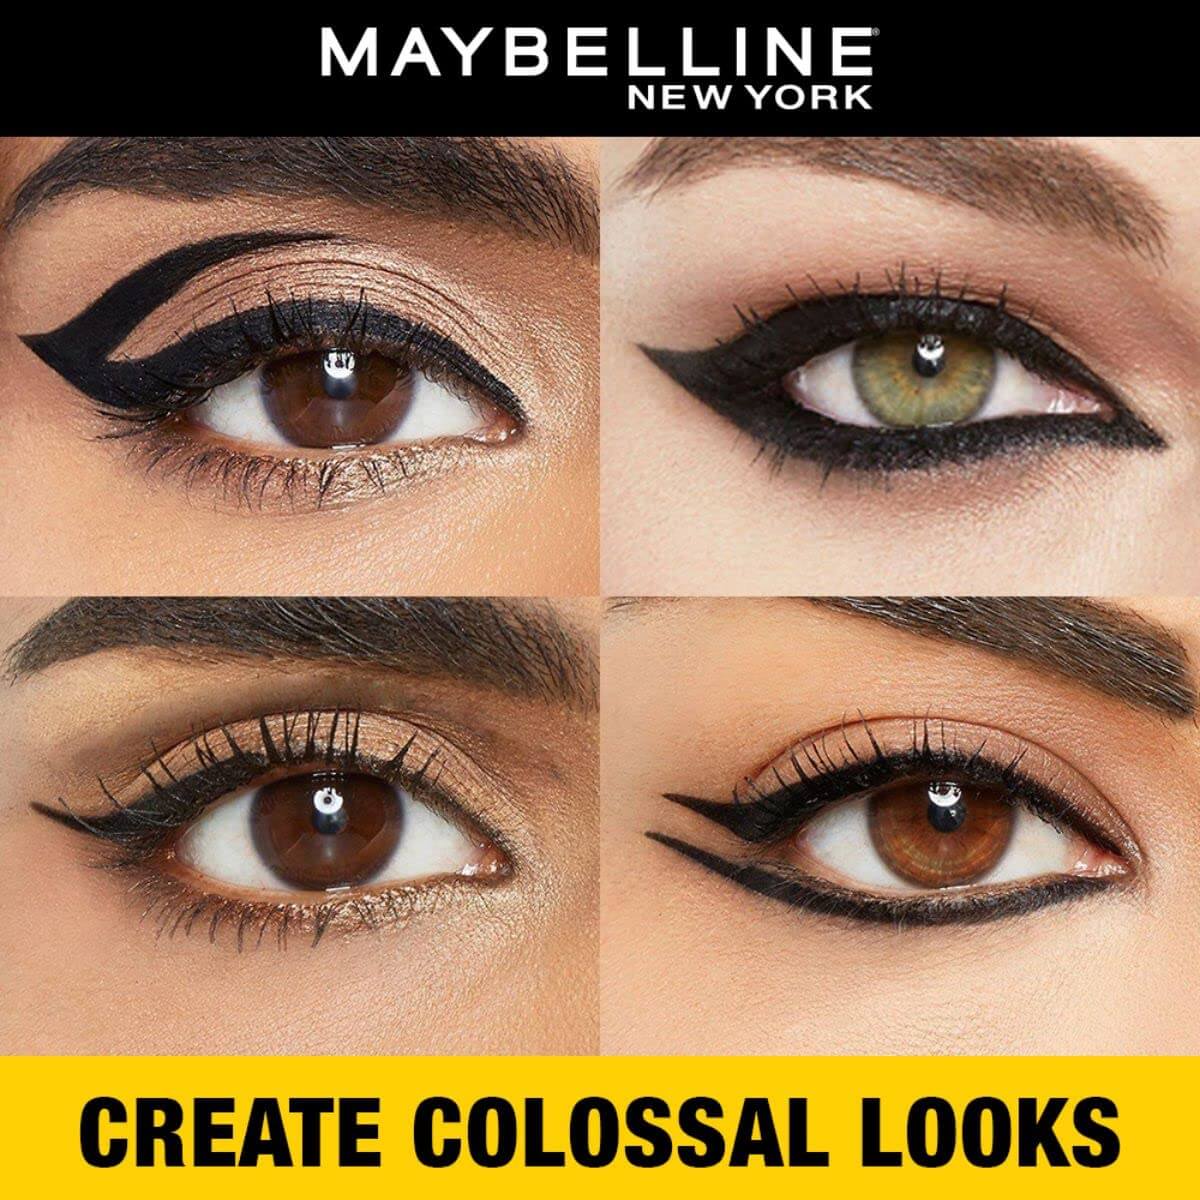 Maybelline New York – Glamiify Eyeliner, and Smudge-proof Bo waterproof, Colossal